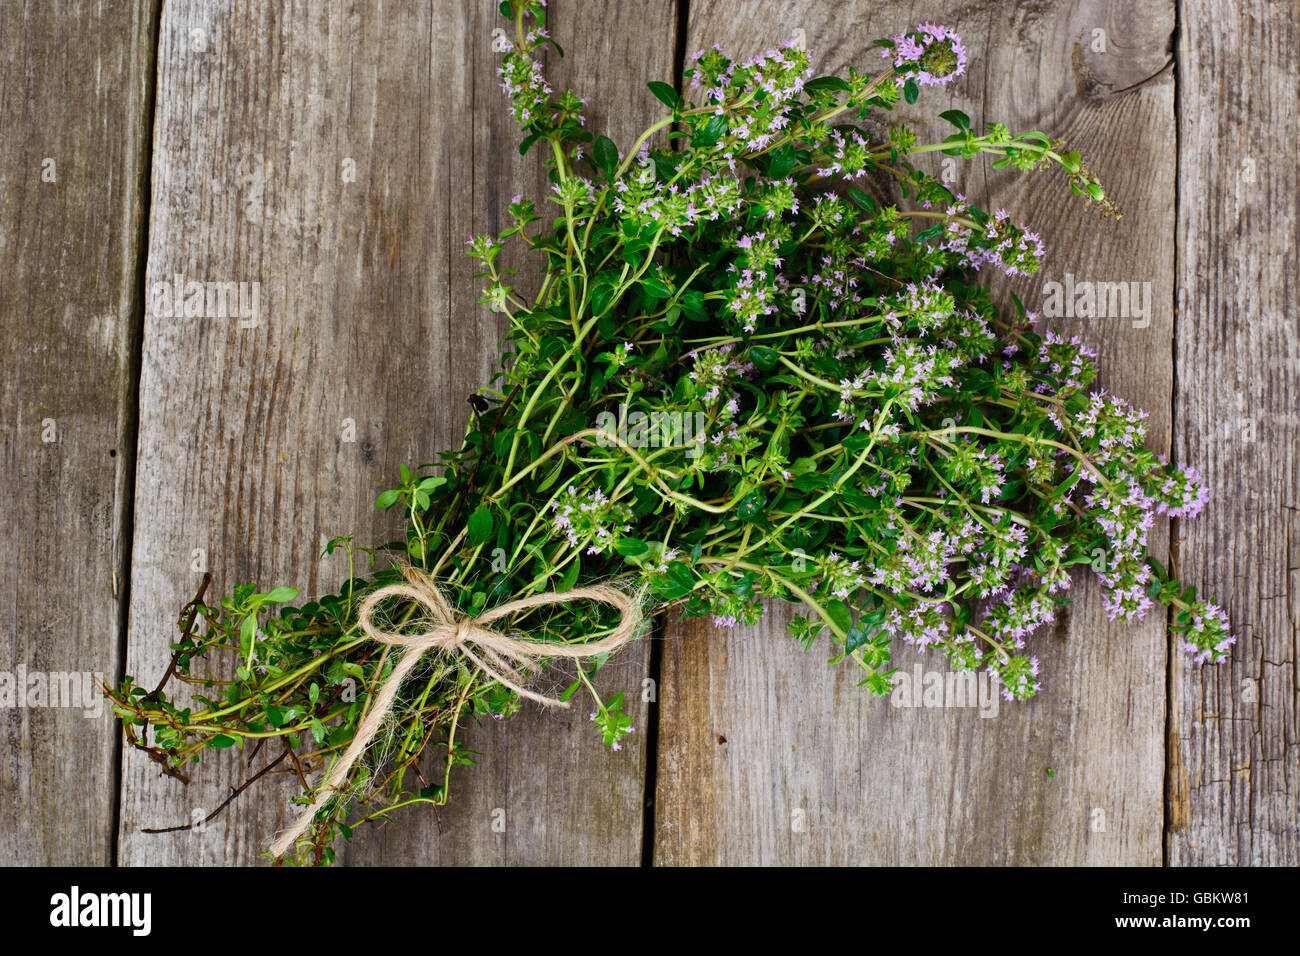 Flowers and Stems of Thyme Stock Photo